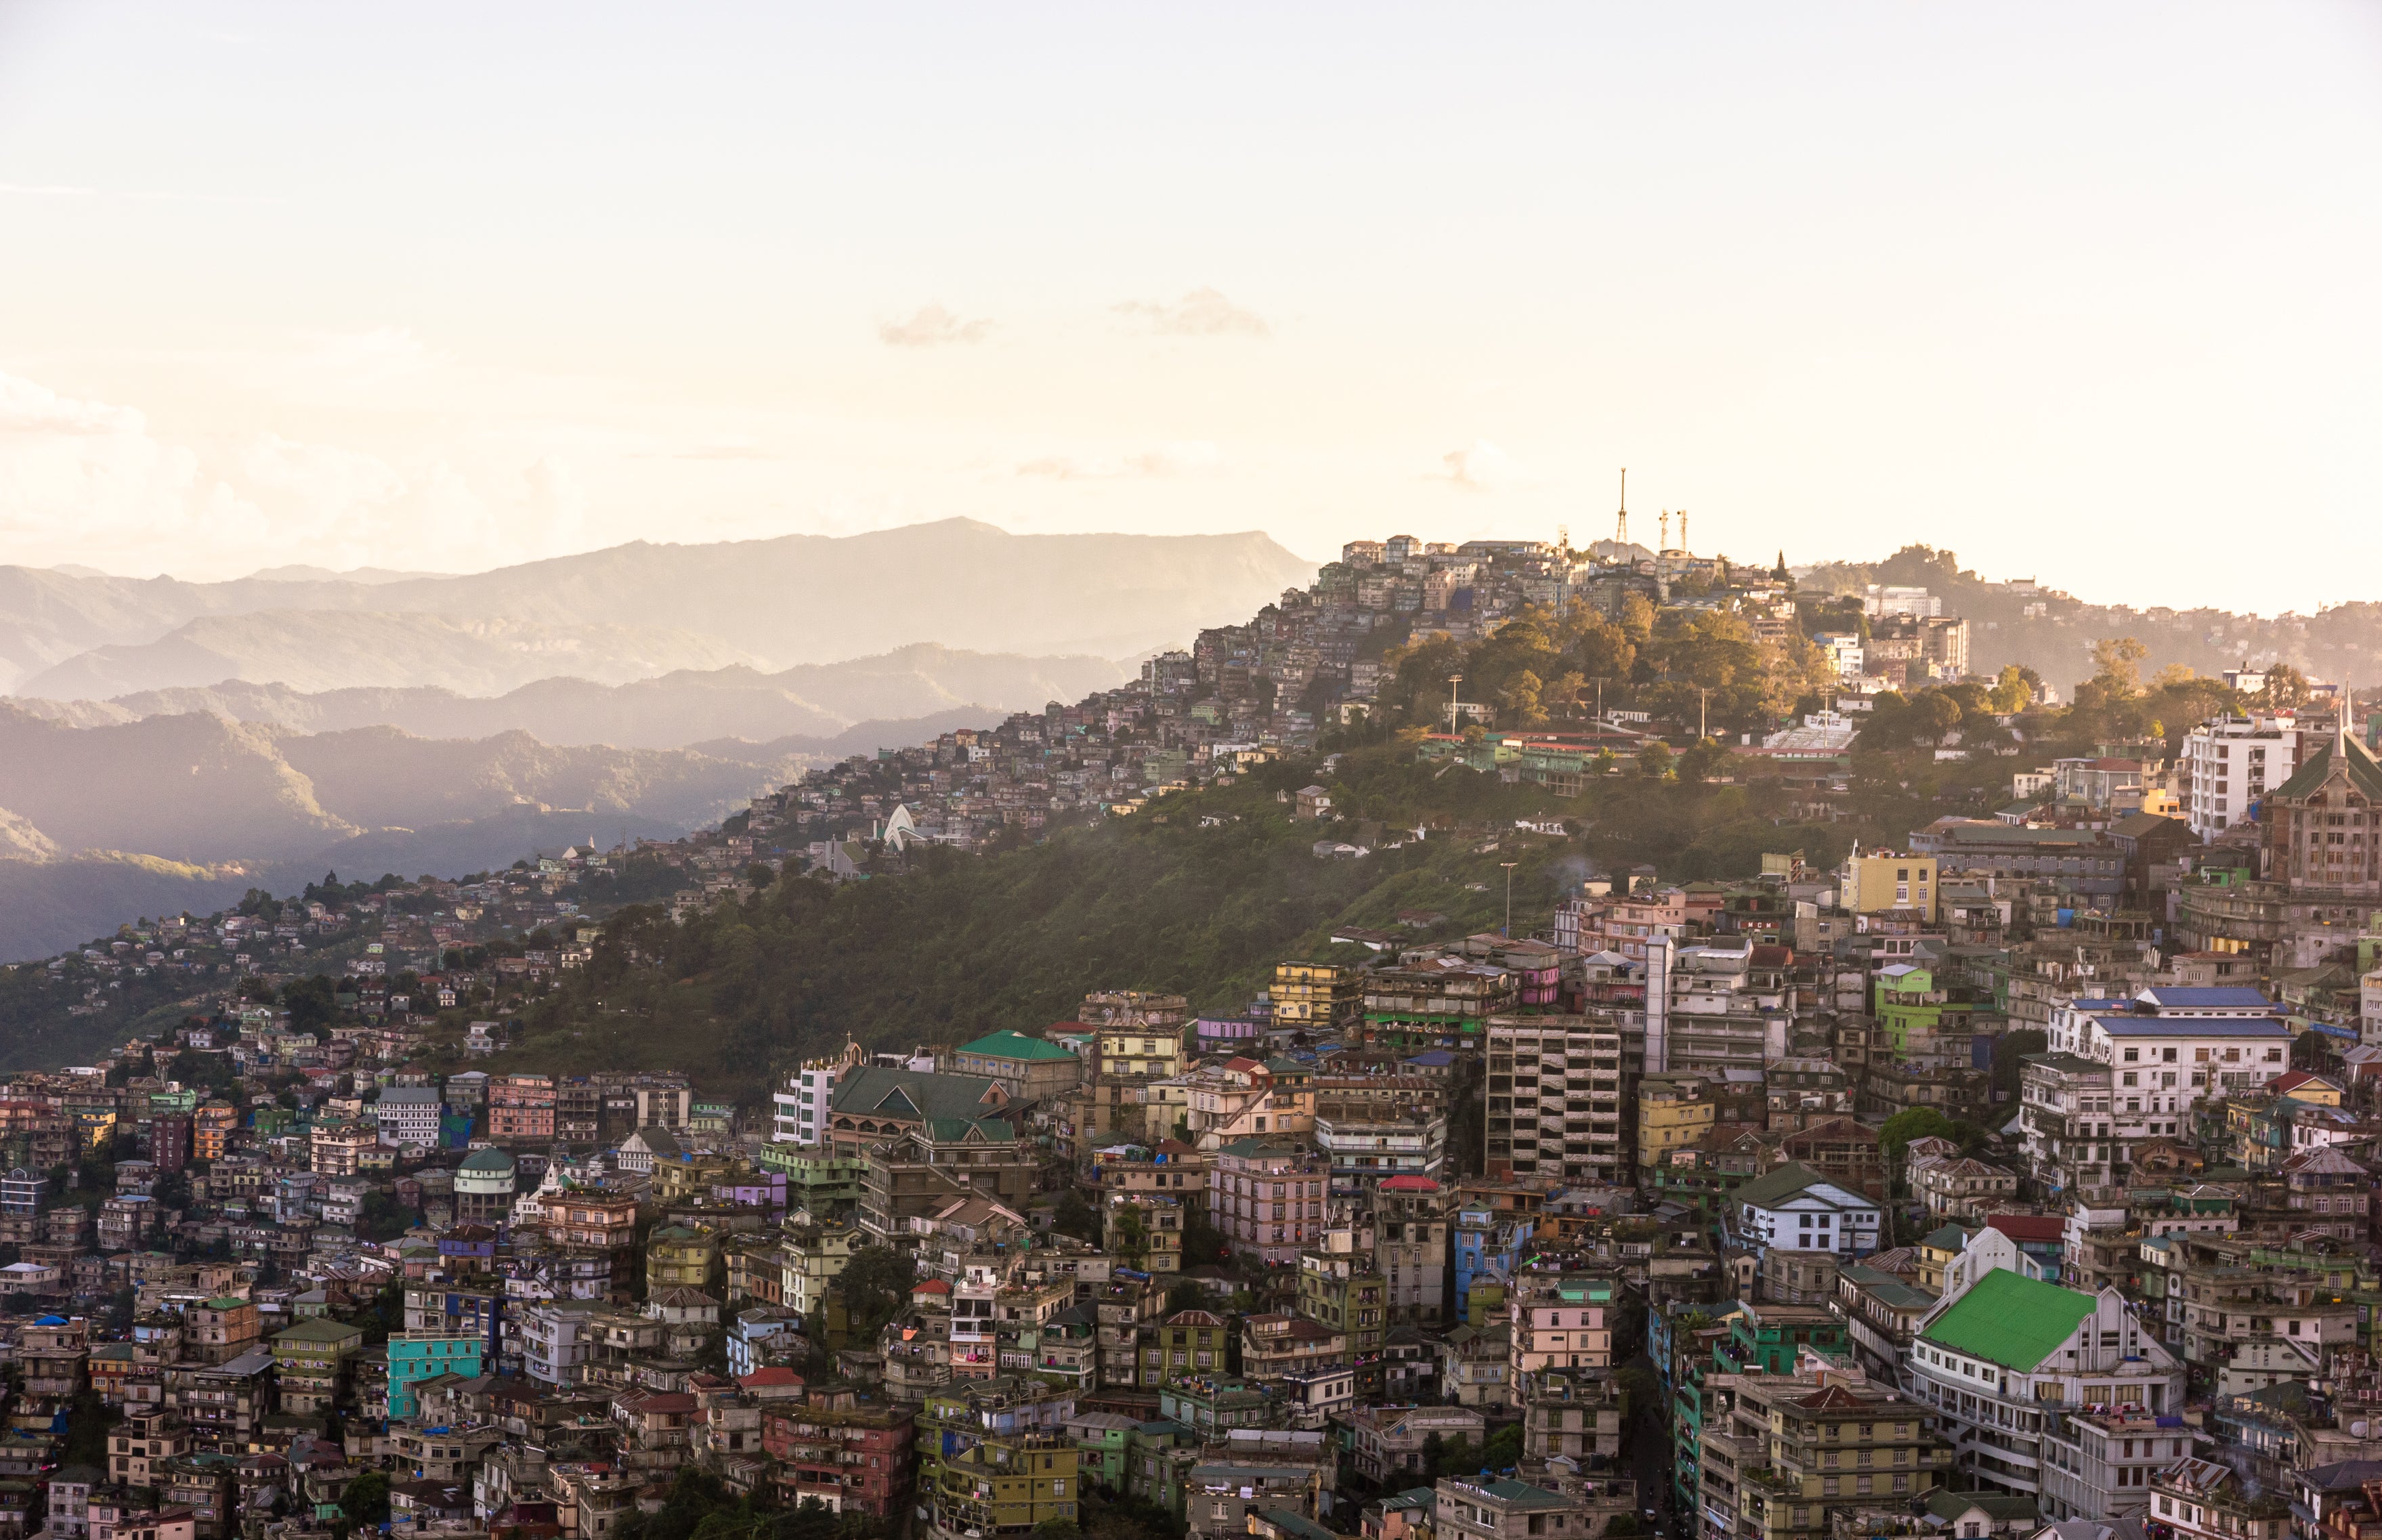 A view of the city of Aizawl in the state of Mizoram in India